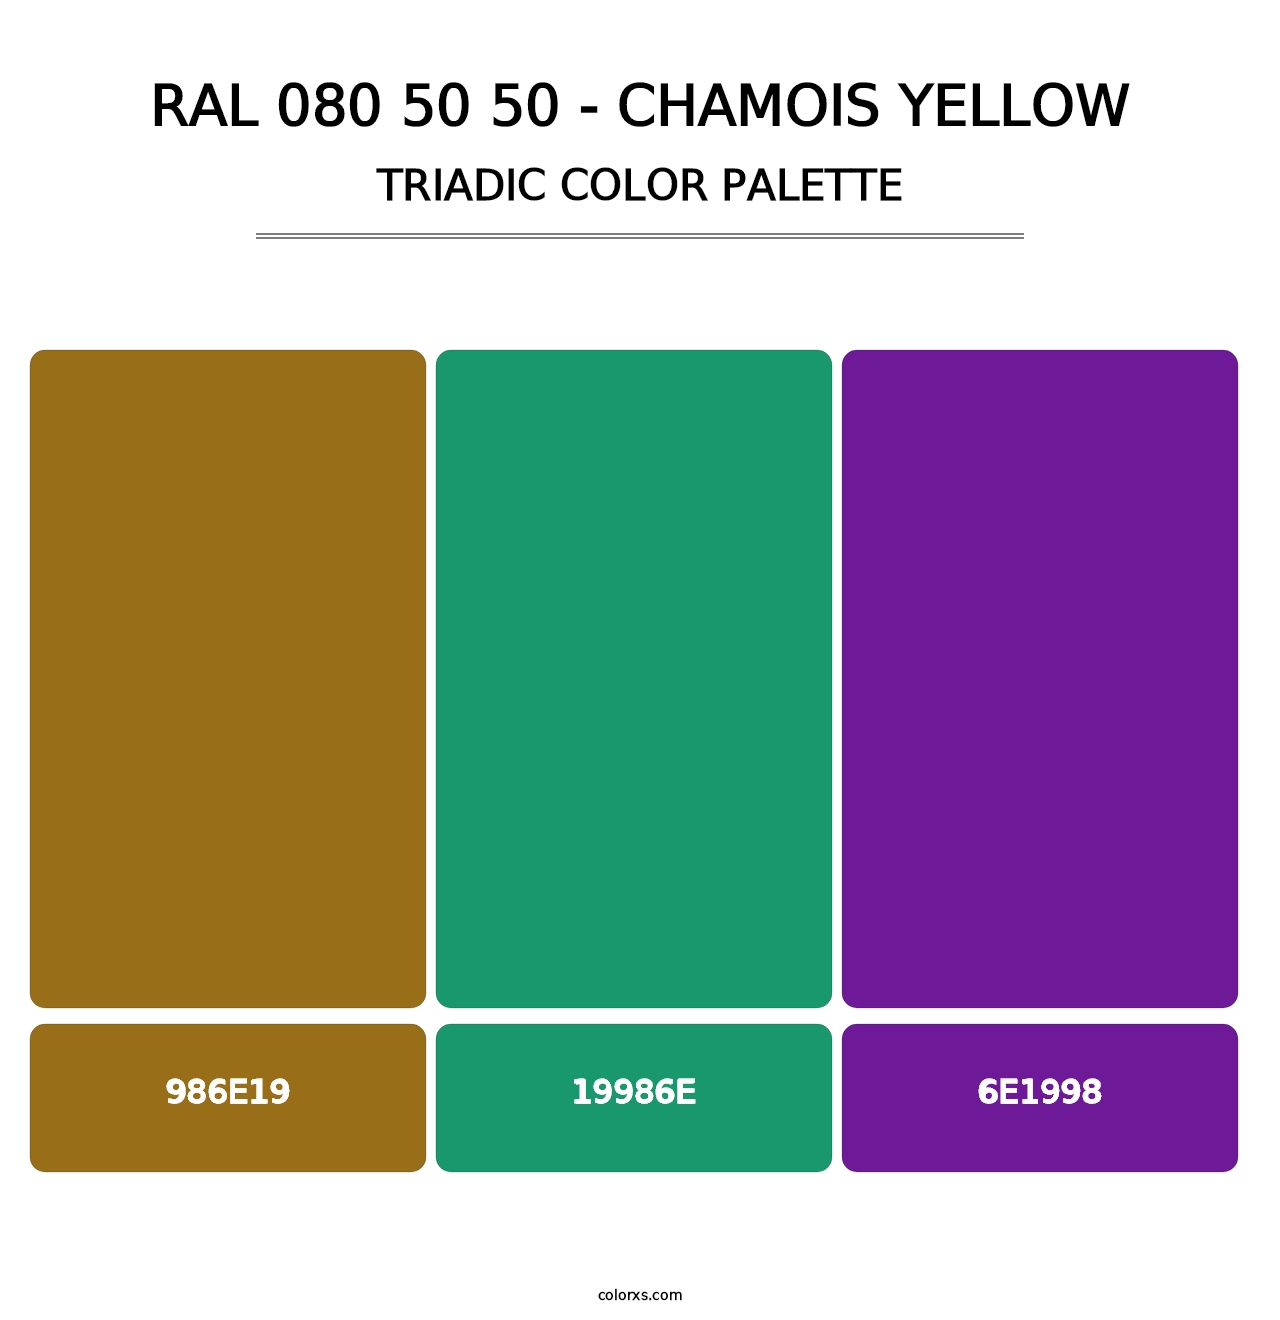 RAL 080 50 50 - Chamois Yellow - Triadic Color Palette